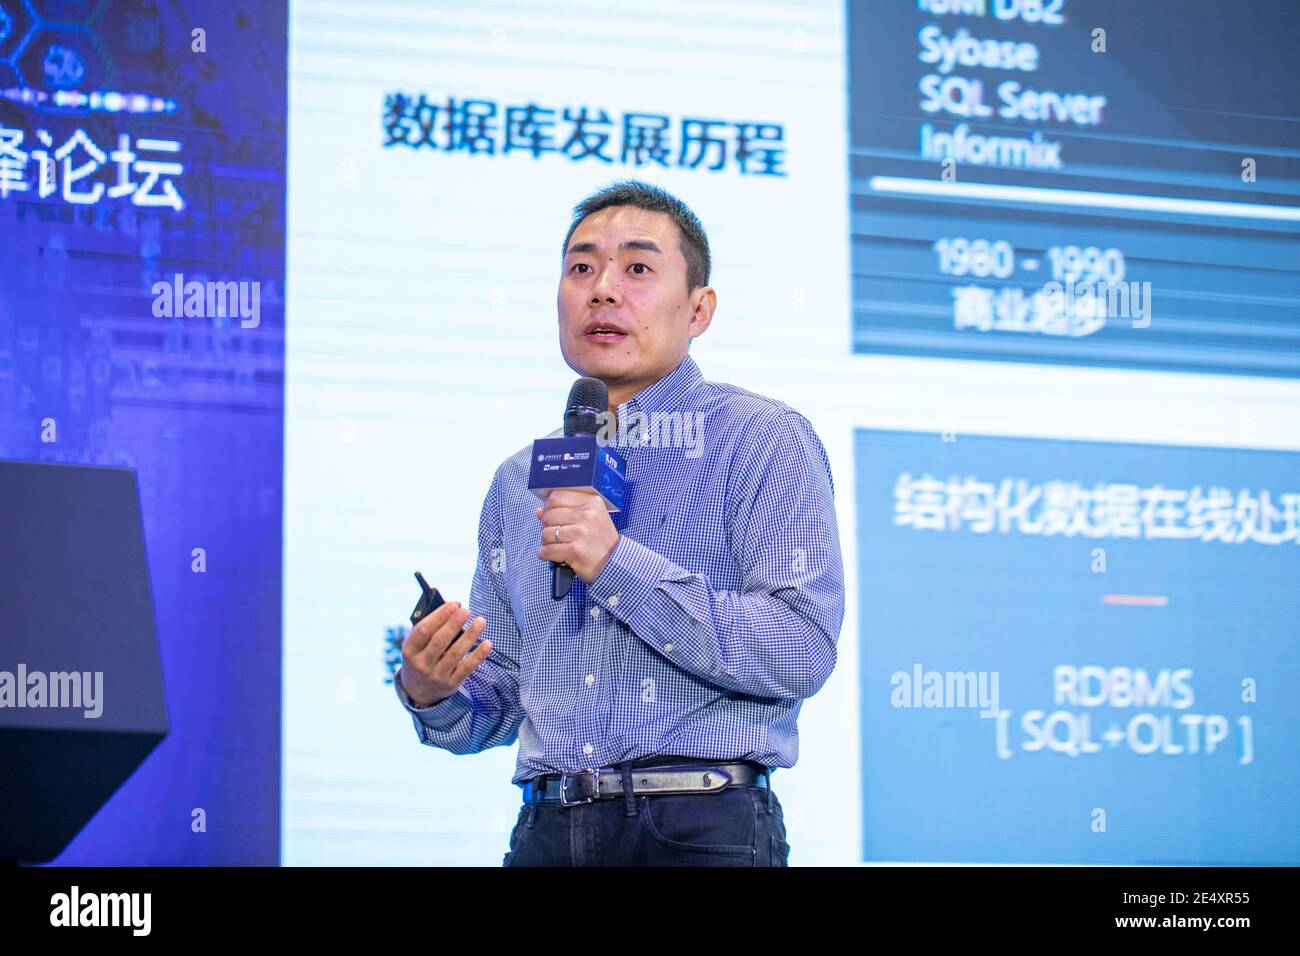 --FILE--Li Feifei, vice president of Alibaba Group, a Chinese multinational technology company specializing in e-commerce, retail, Internet, and techn Stock Photo